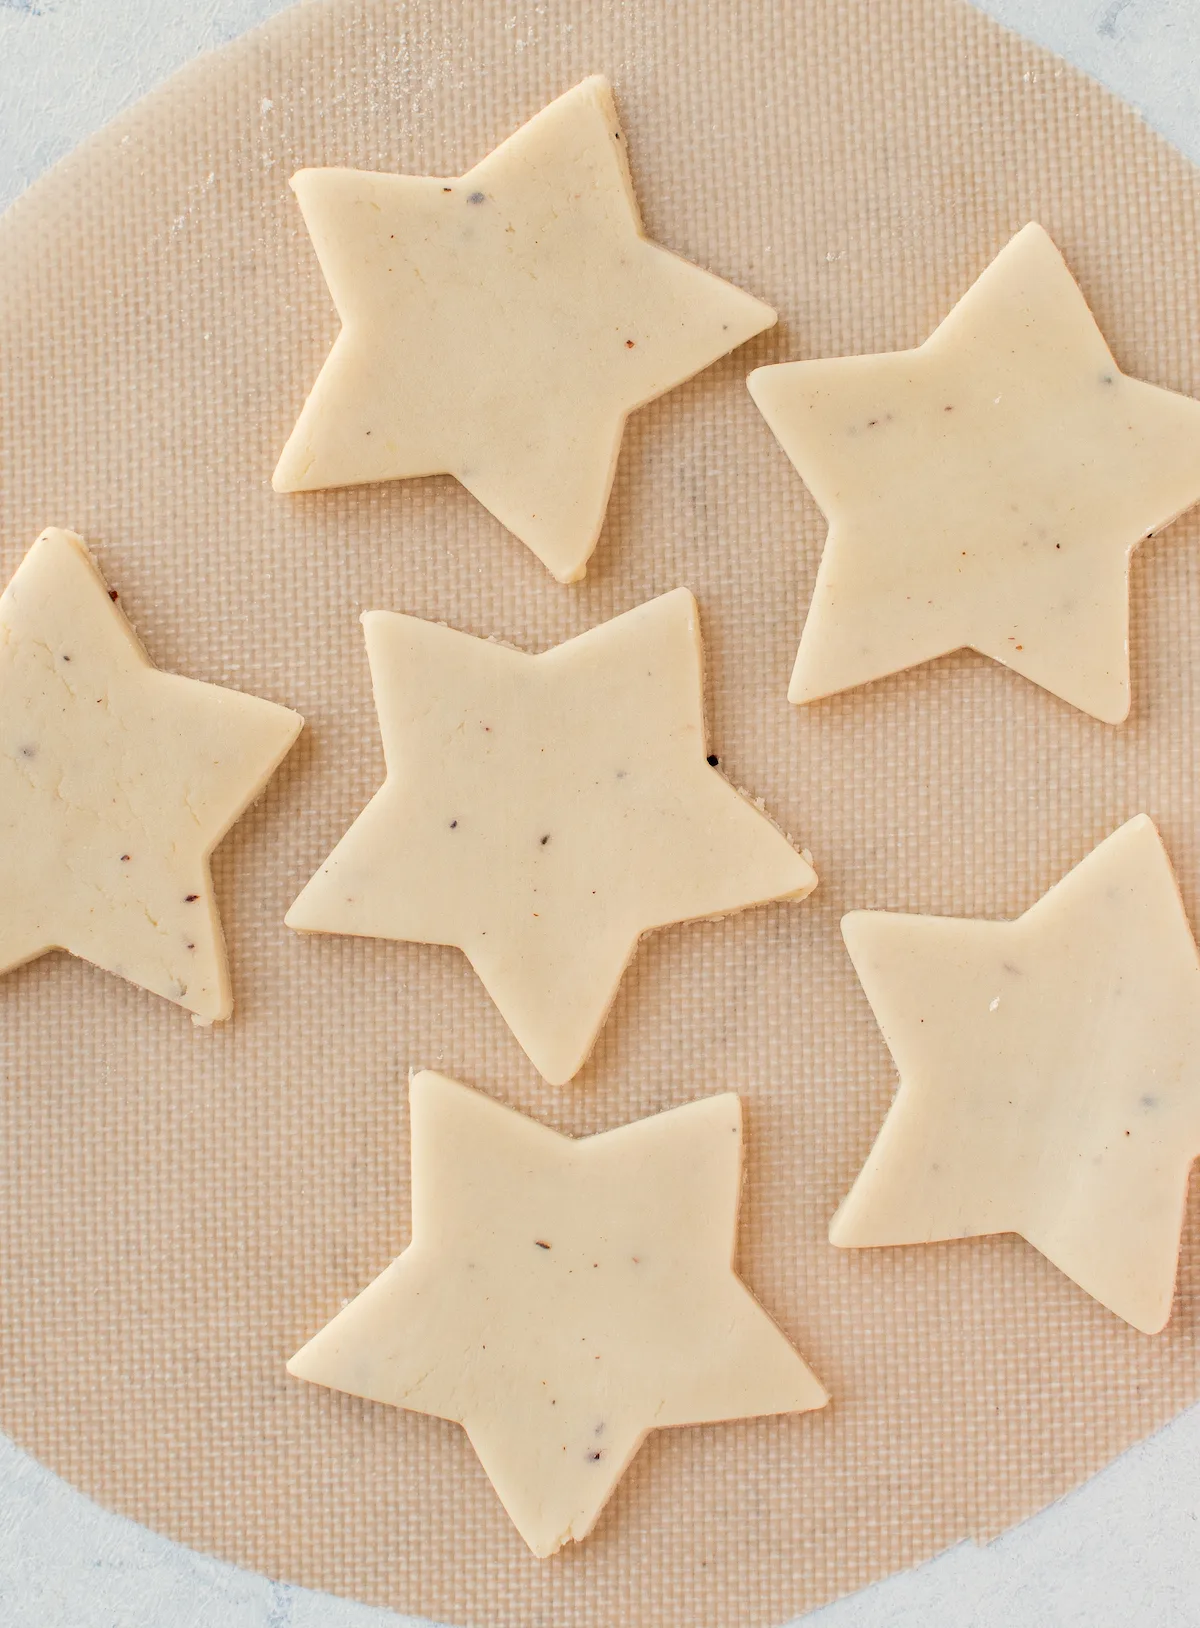 Stars cut out of the cookie dough